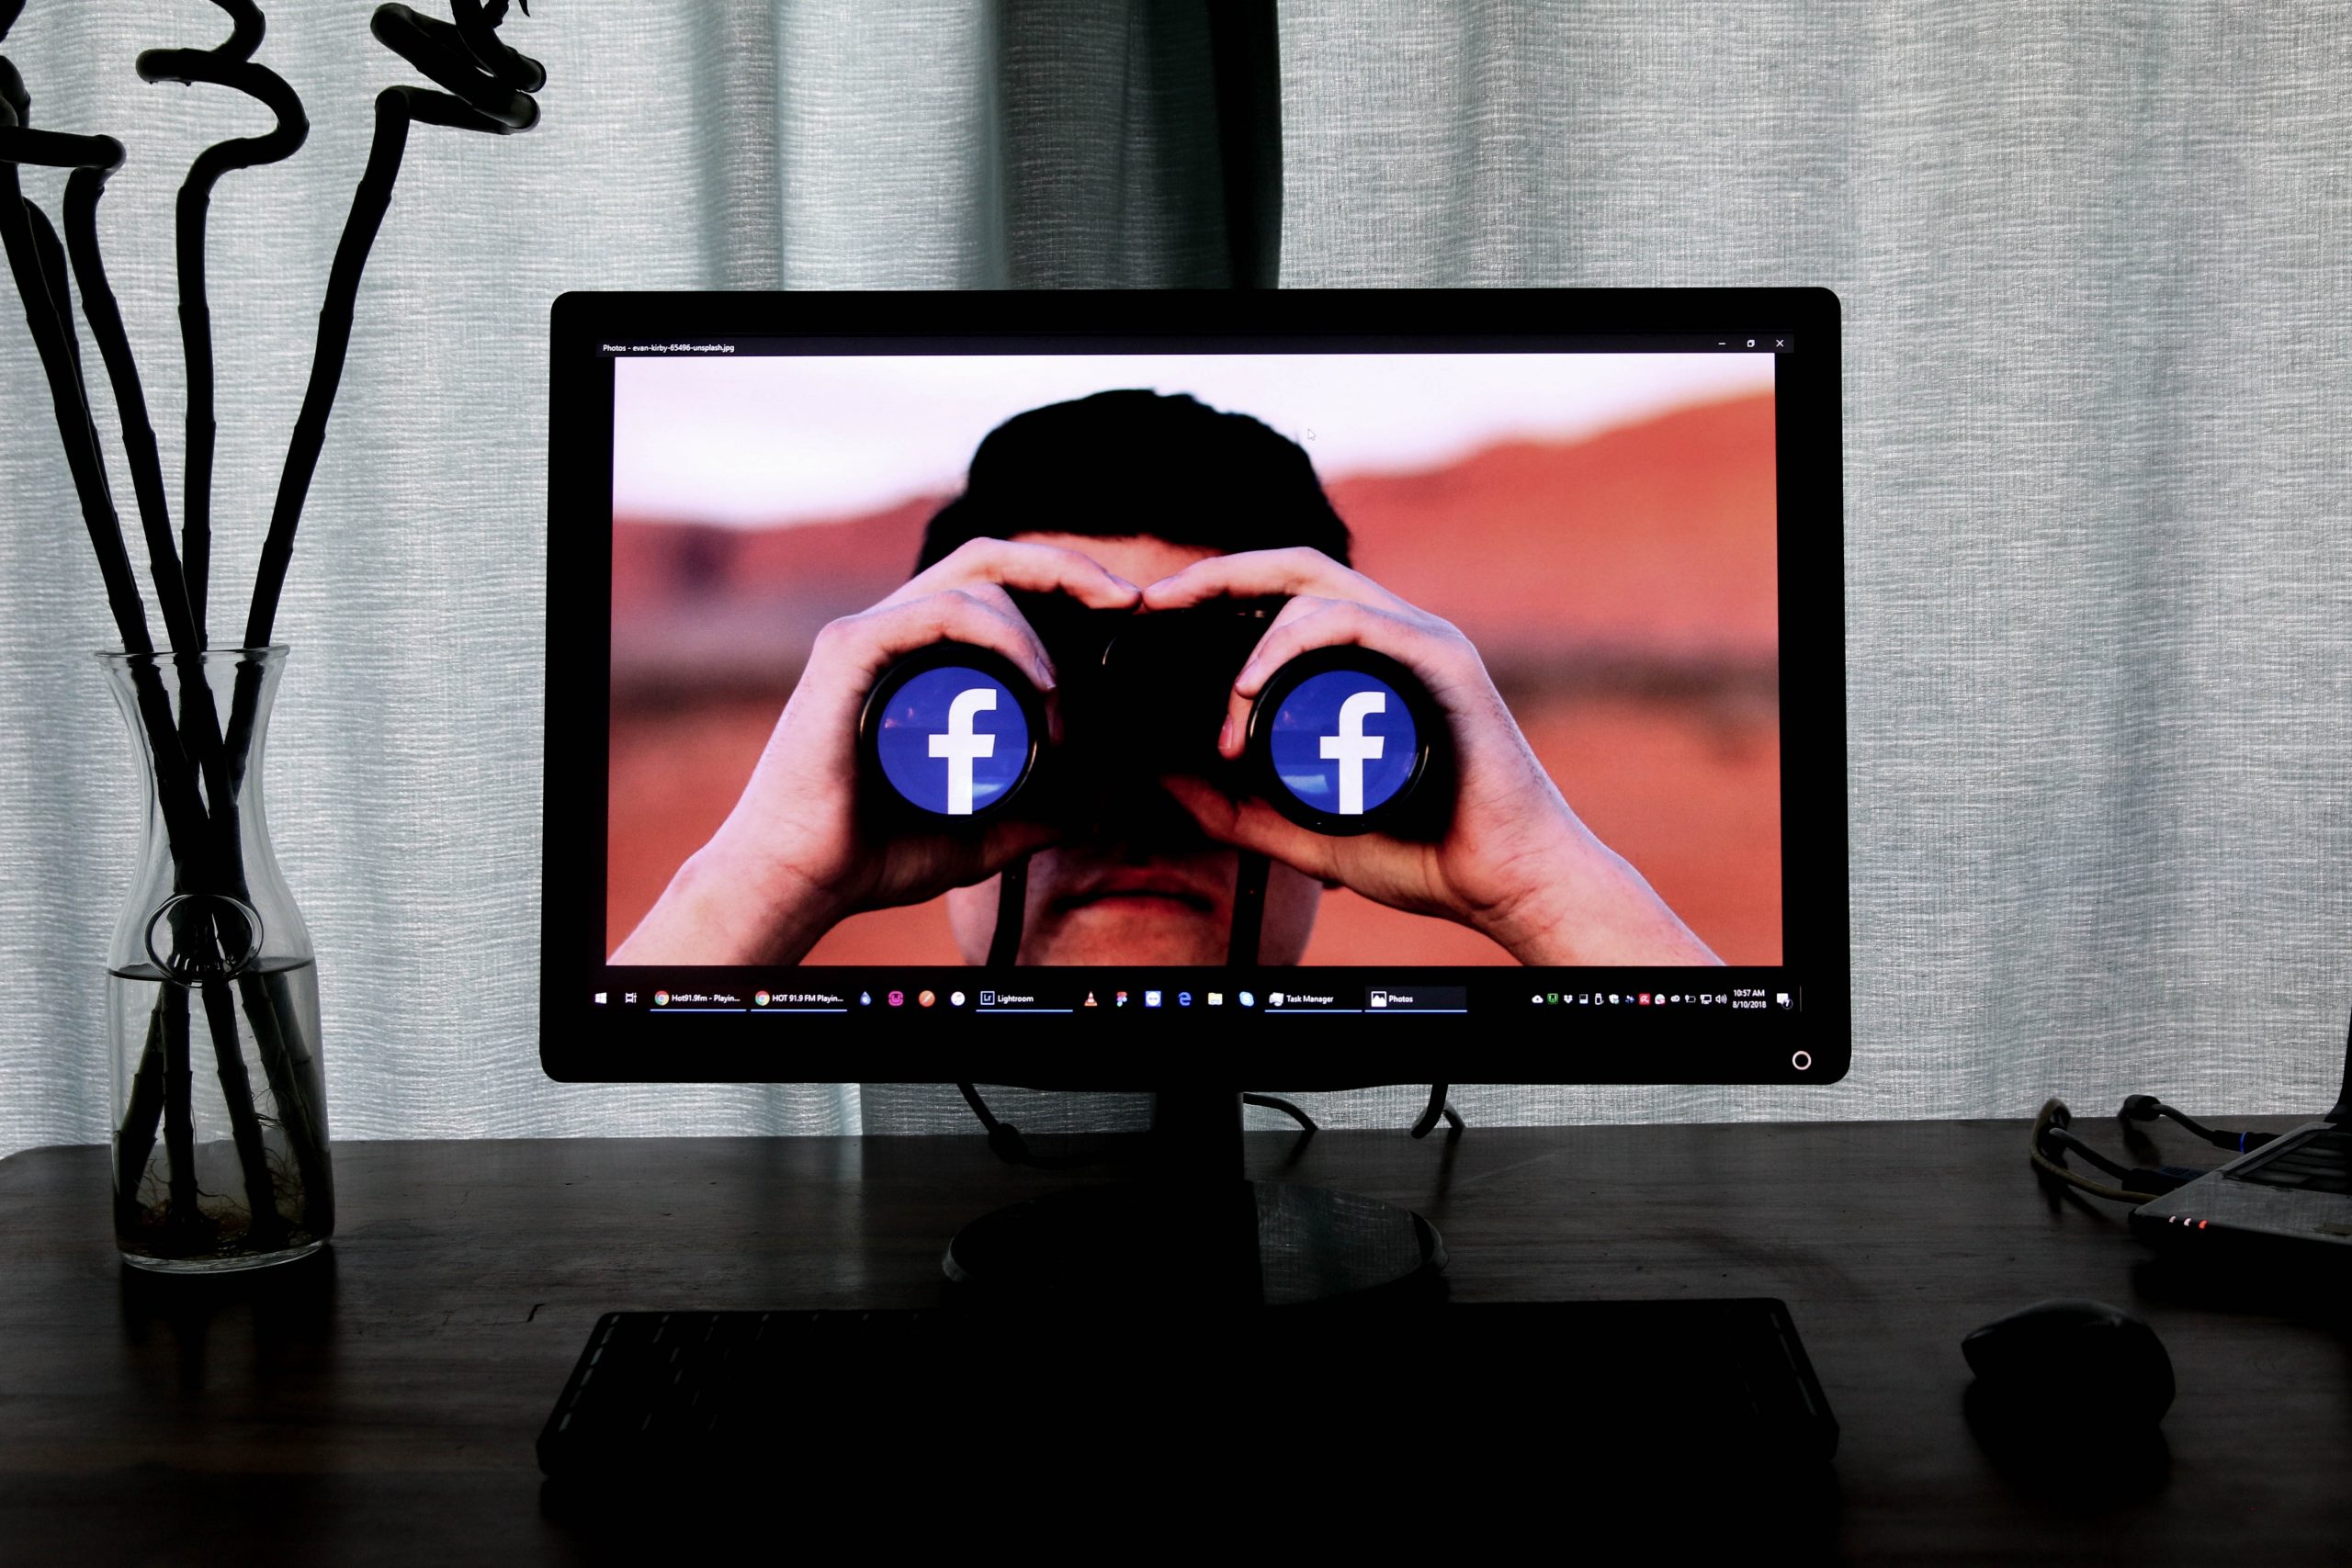 A computer screen shows a man using a pair of binoculars looking at the photographer. The Facebook logo is shown in both the eye holes.